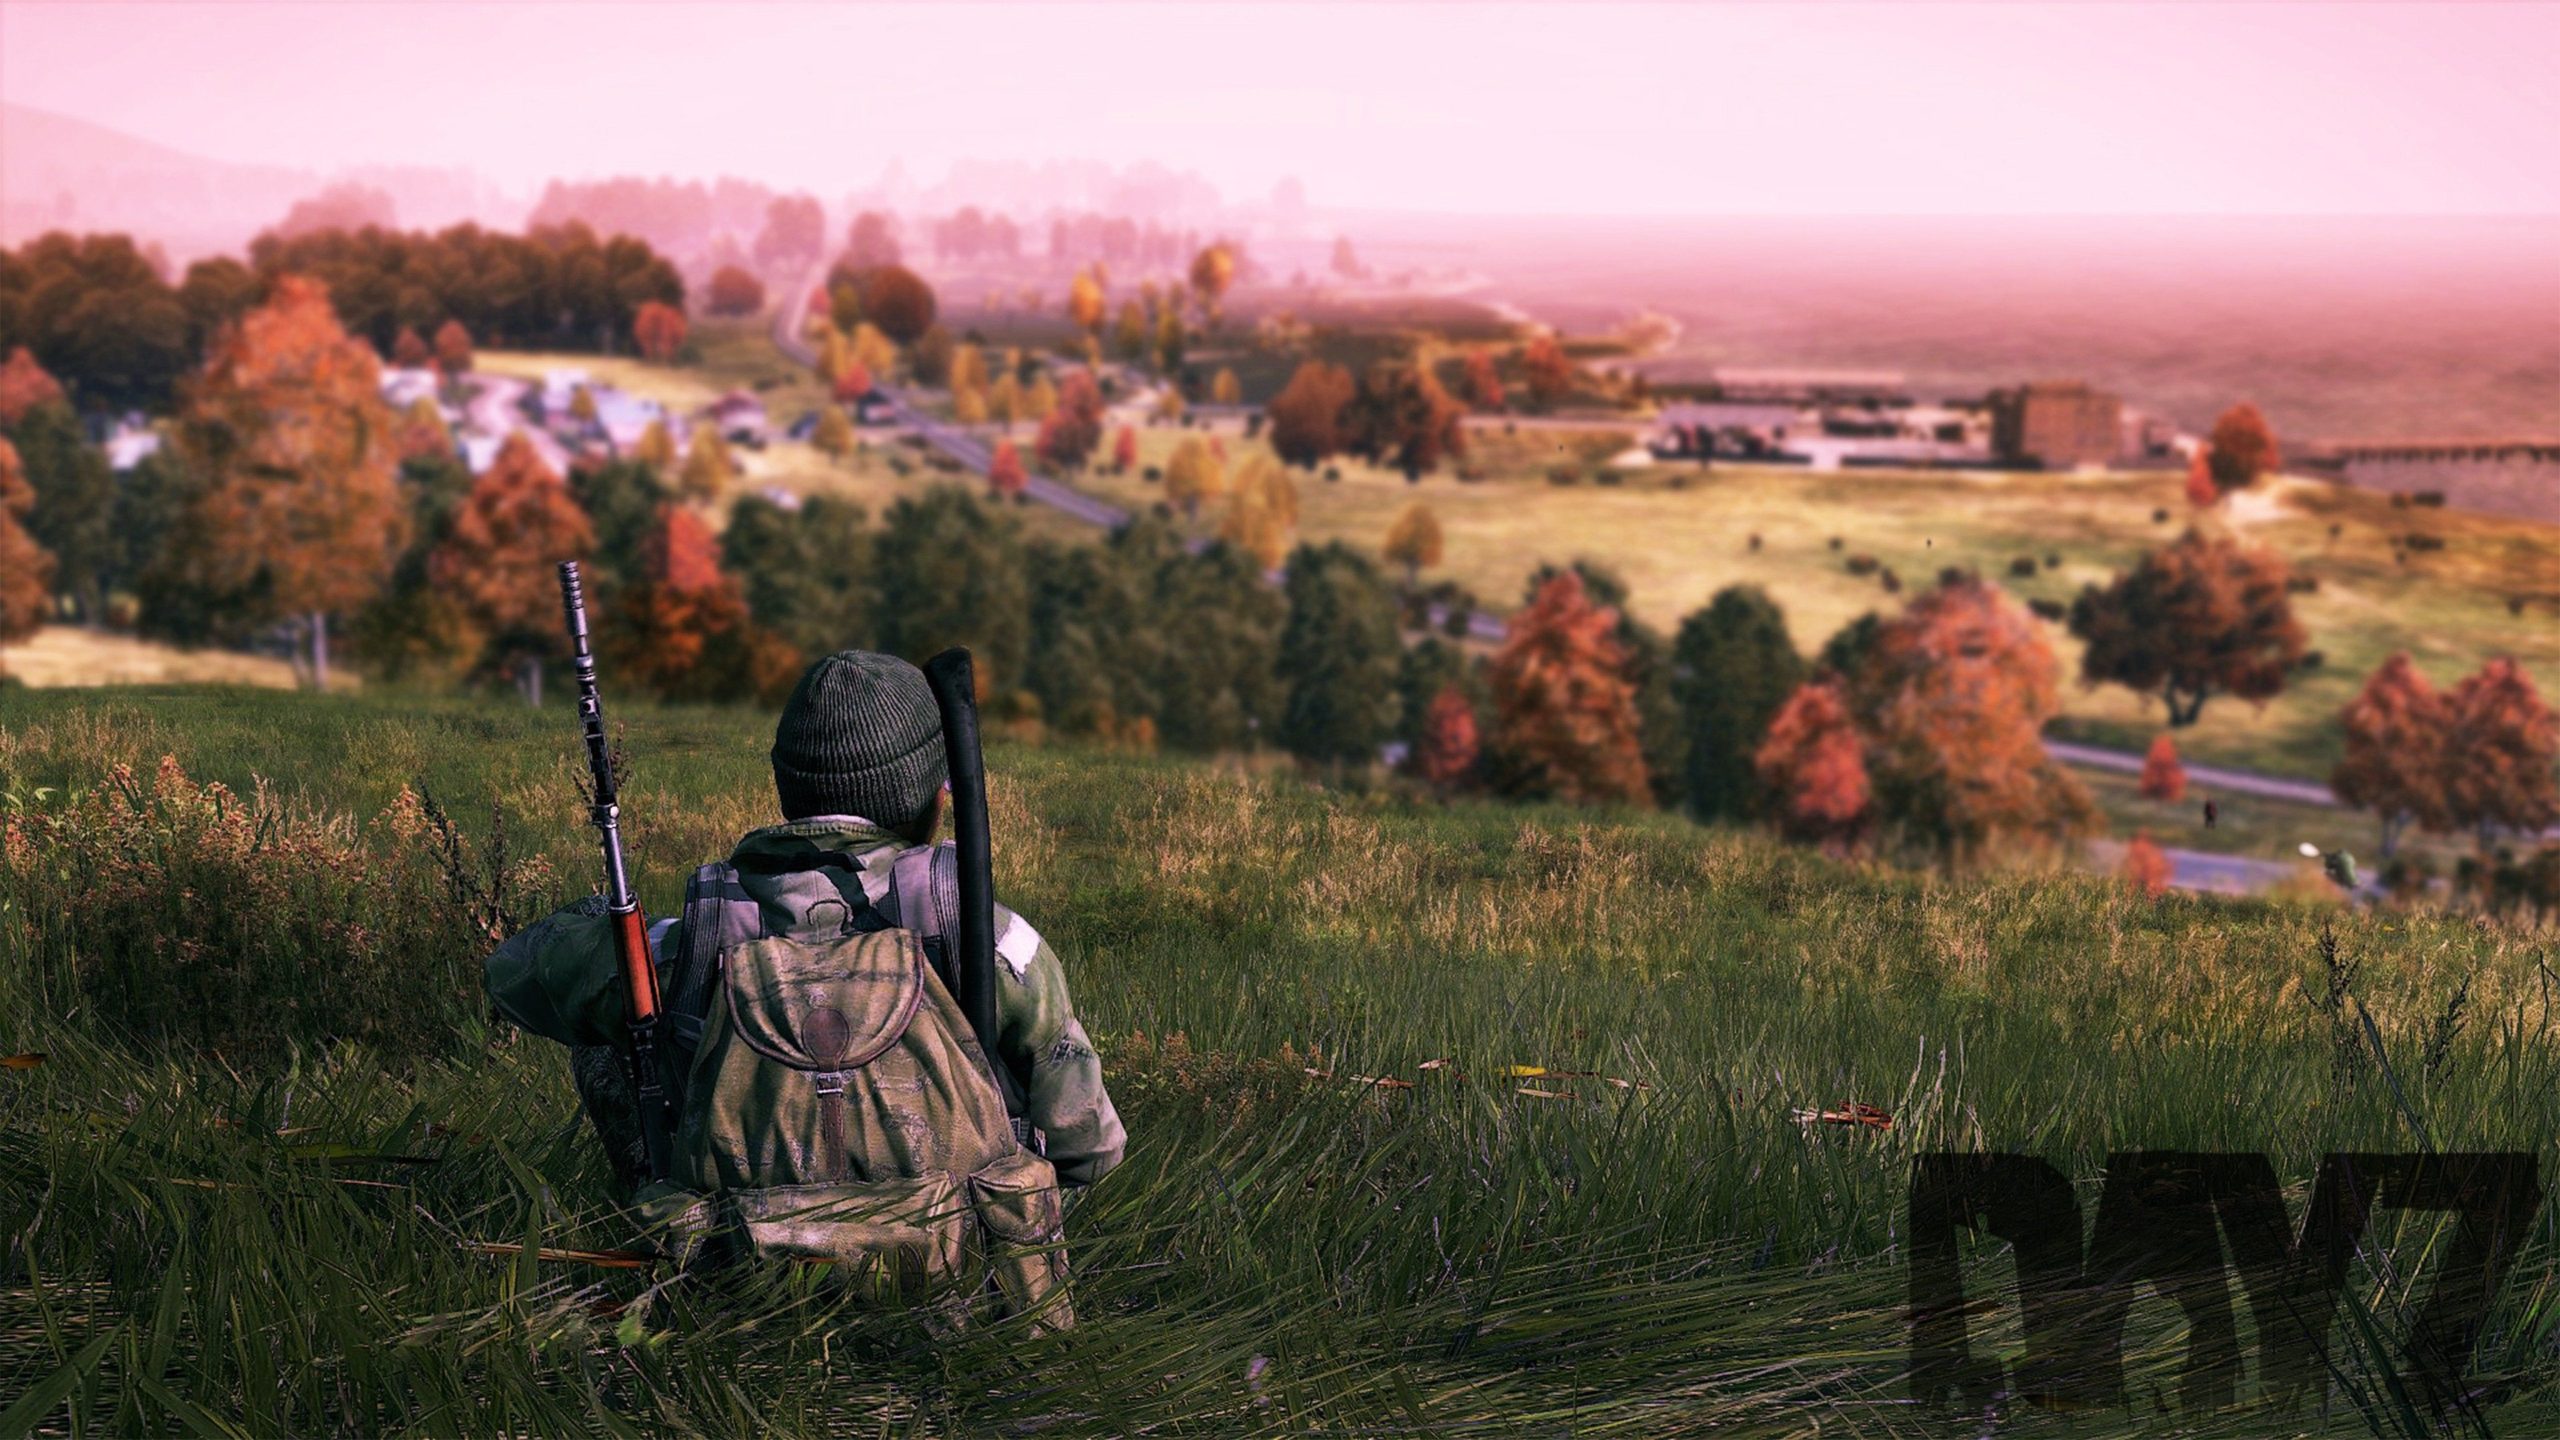 DayZ Wallpapers